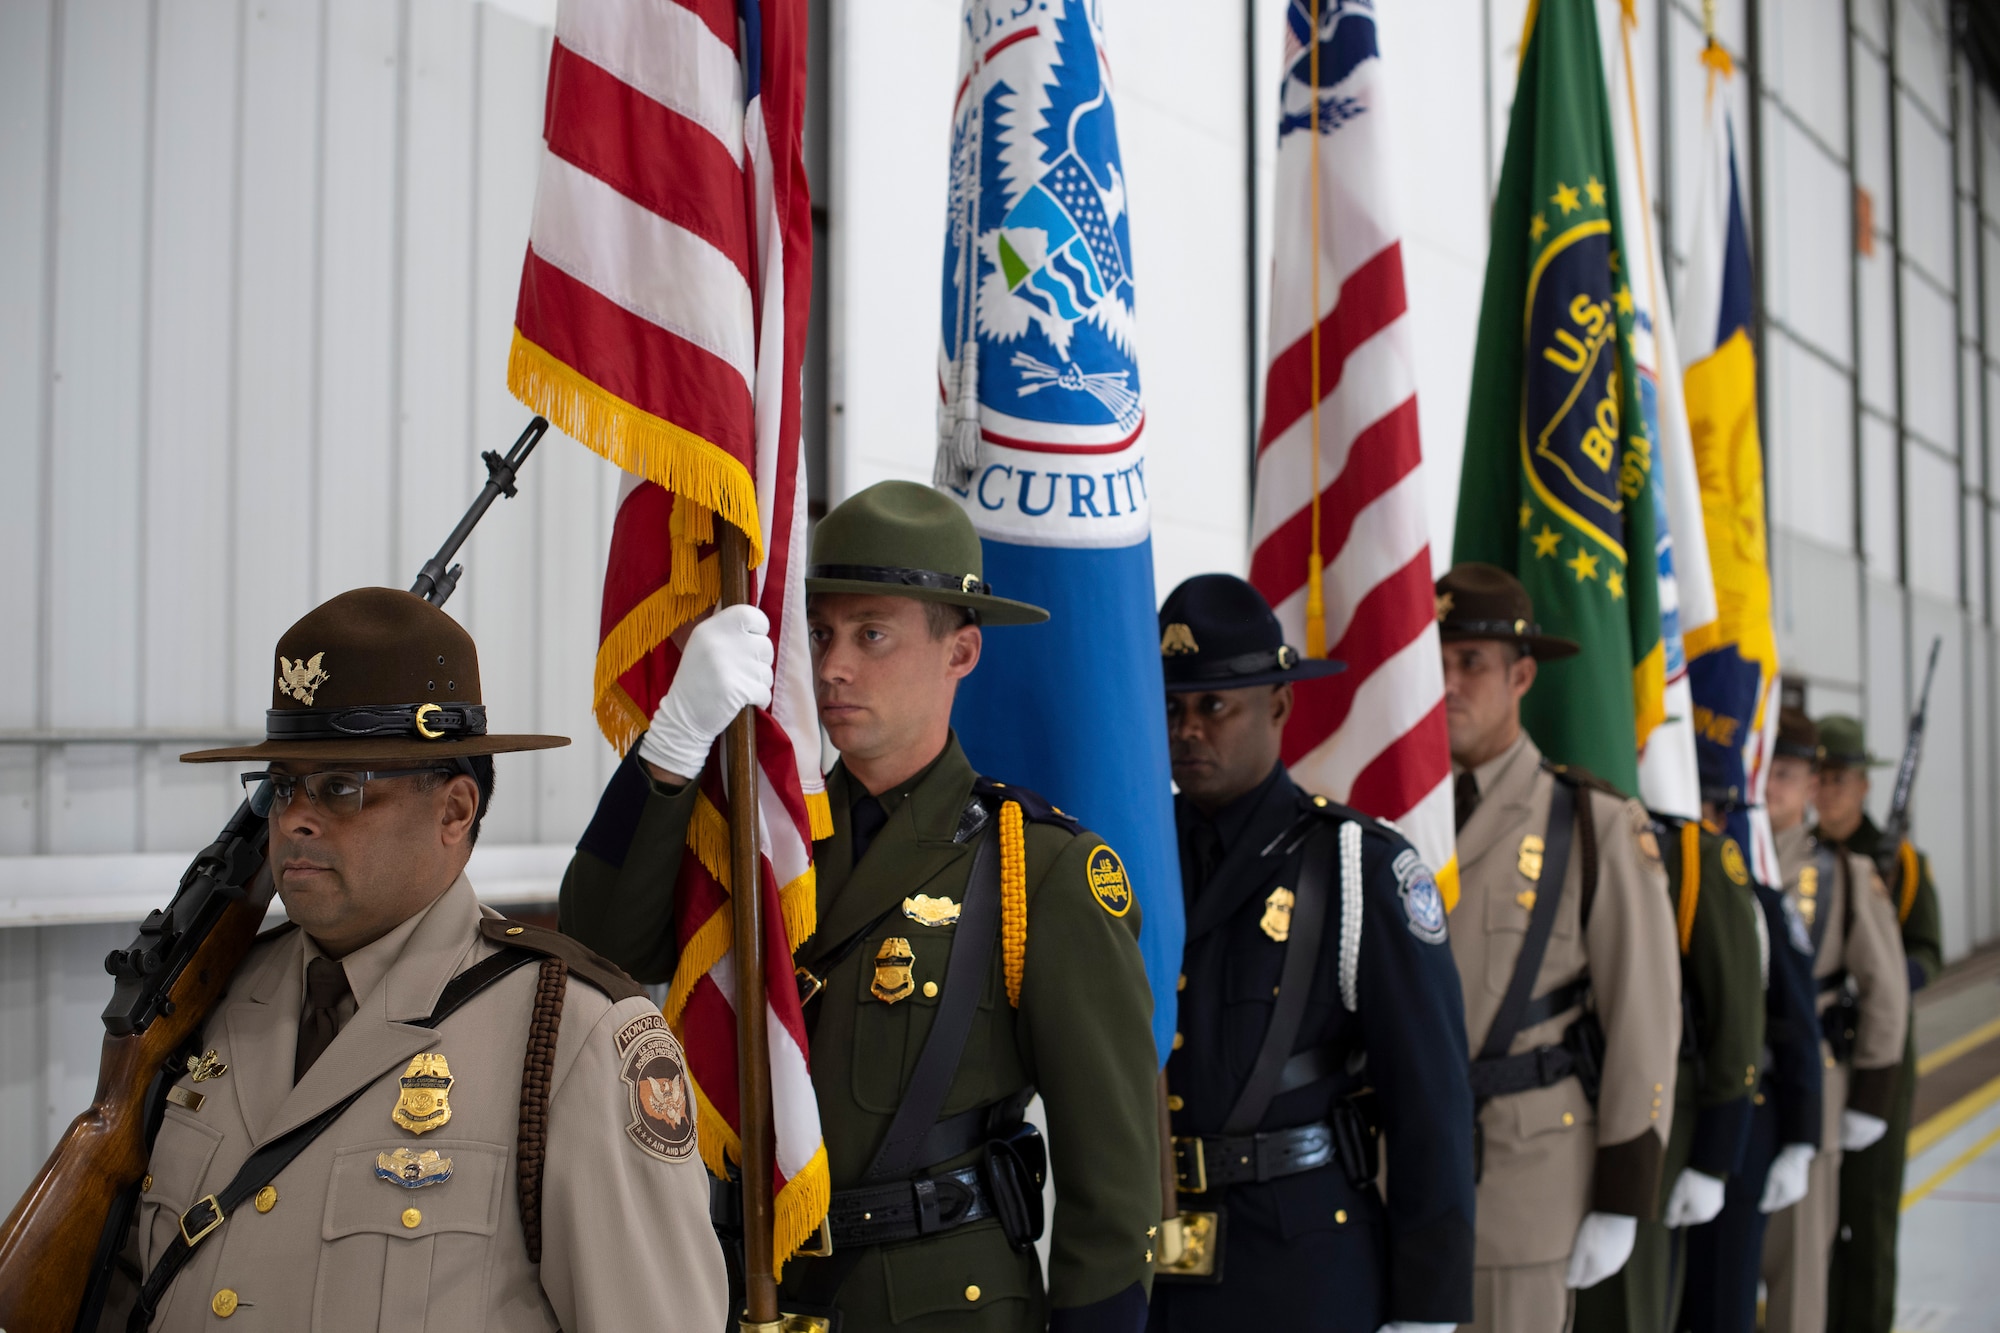 Members of the U.S. Customs and Border Protection Honor Guard stand ready to present their flags during a ceremony August 28, 2019, on Grand Forks Air Force Base, North Dakota. The ceremony celebrated a newly-renovated facility on base which will house manned and unmanned CBP aircraft assigned to the National Air and Security Operations Center, Grand Forks. (U.S. Air Force photo by Senior Airman Elora J. Martinez)